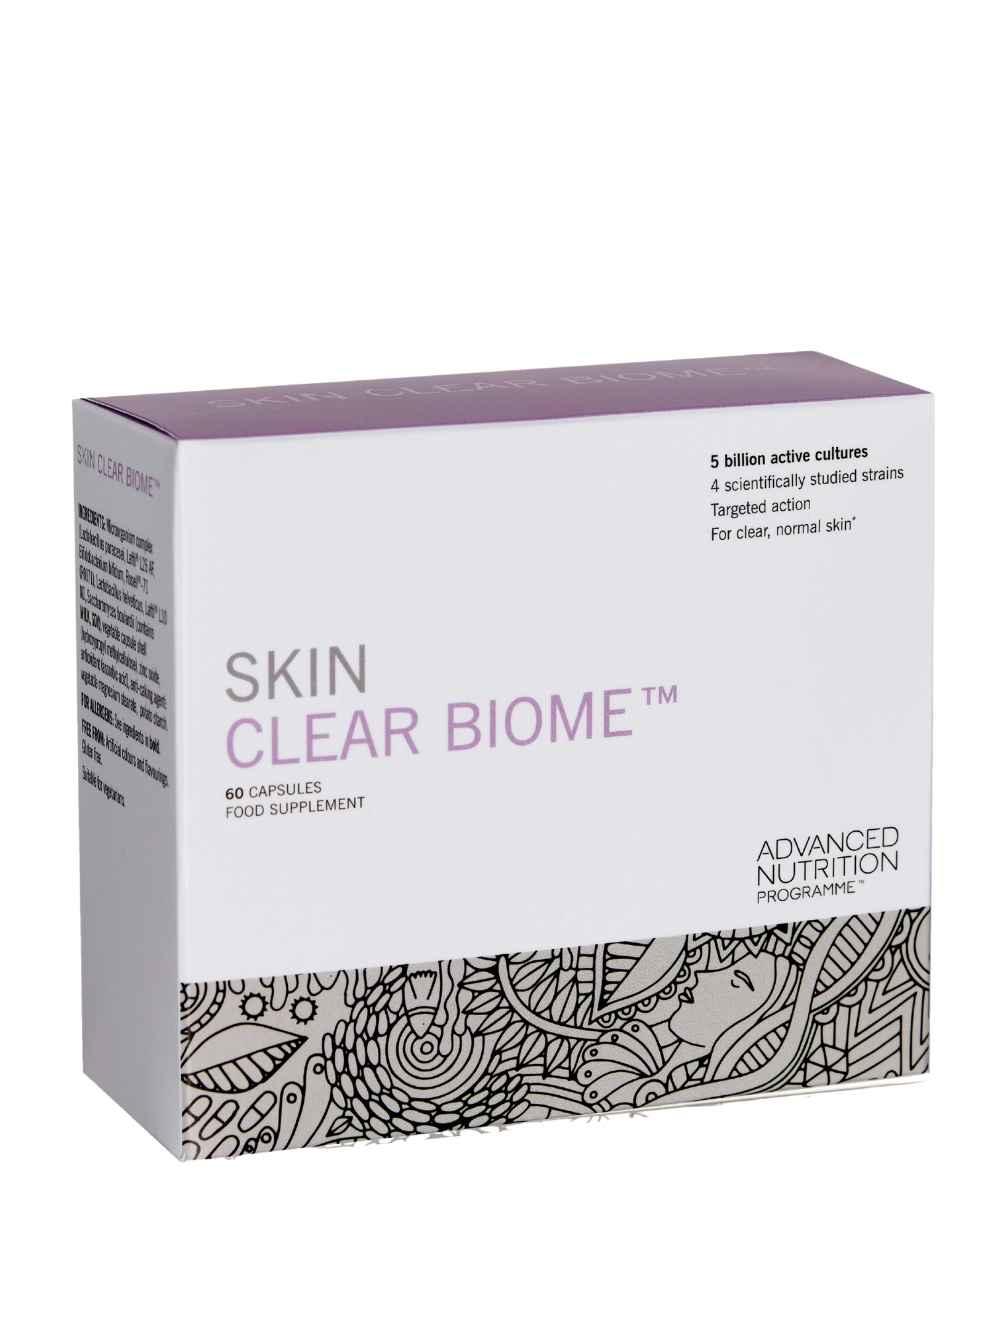 Advanced Nutrition Programme Skin Clear Biome 60 Capsules | Supplements ...